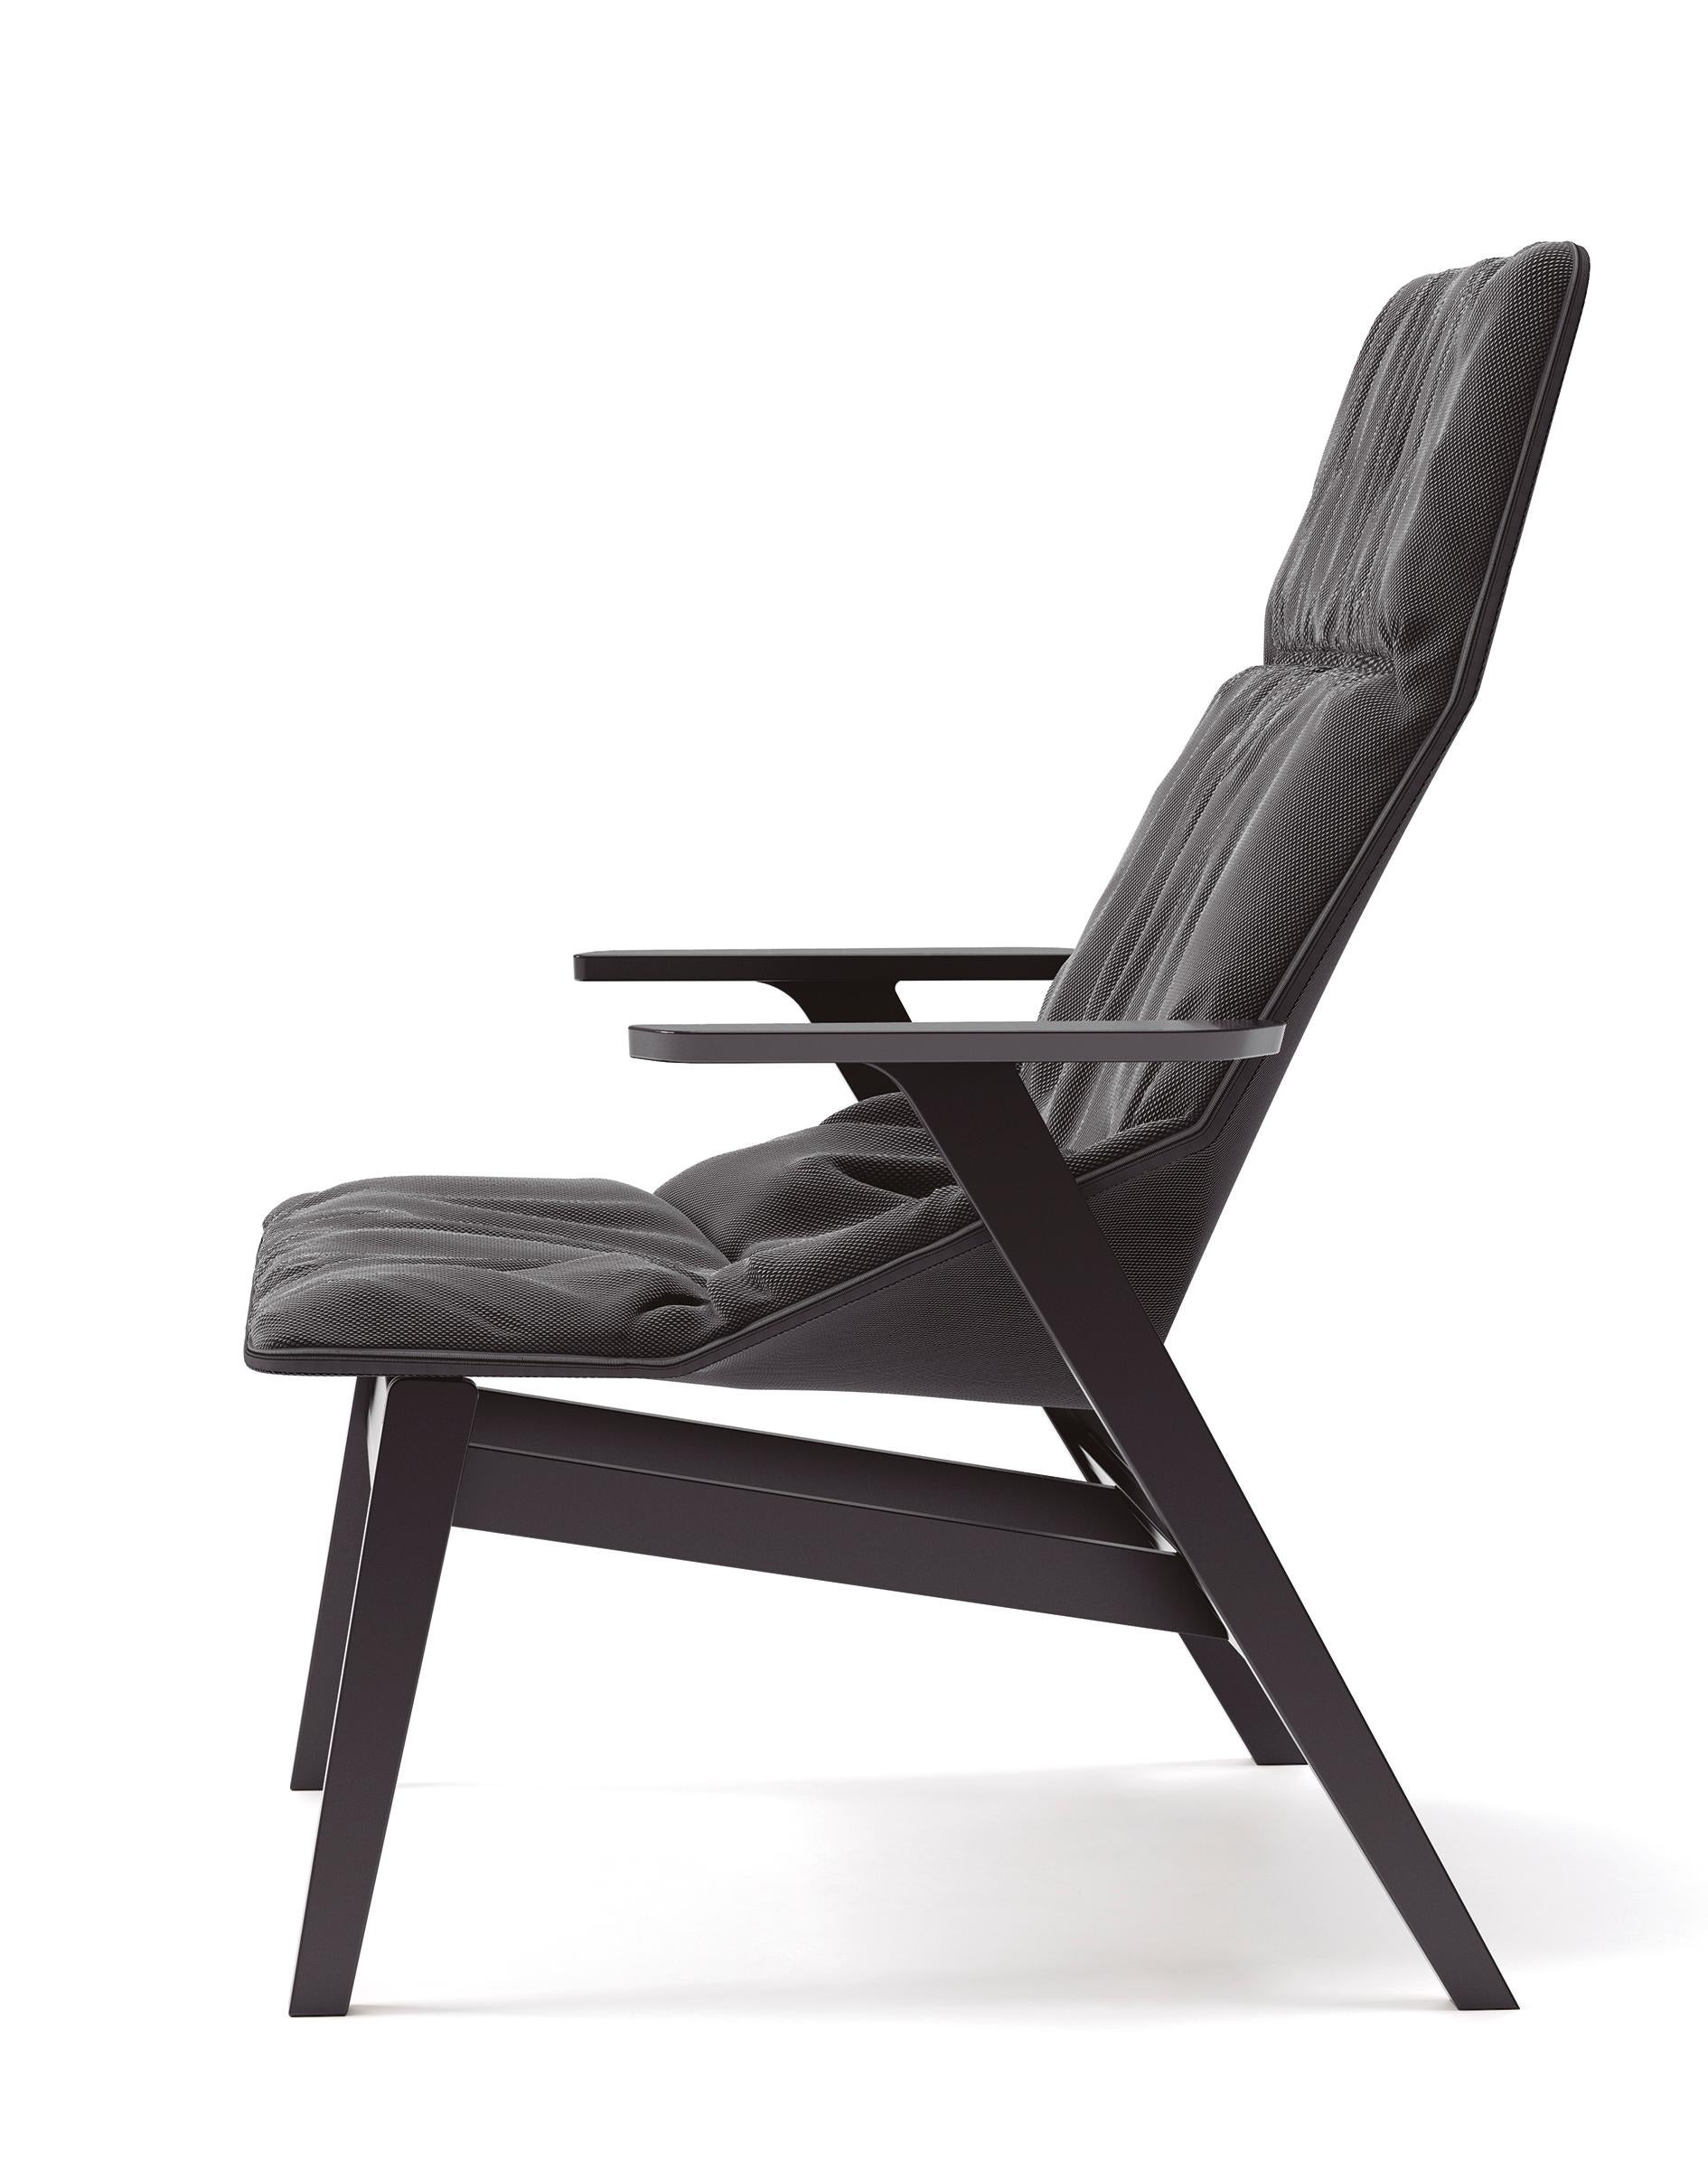 Jean-Marie Massaud, Ace Lounge Chair with Arms, Viccarbe, 2009 For Sale 3